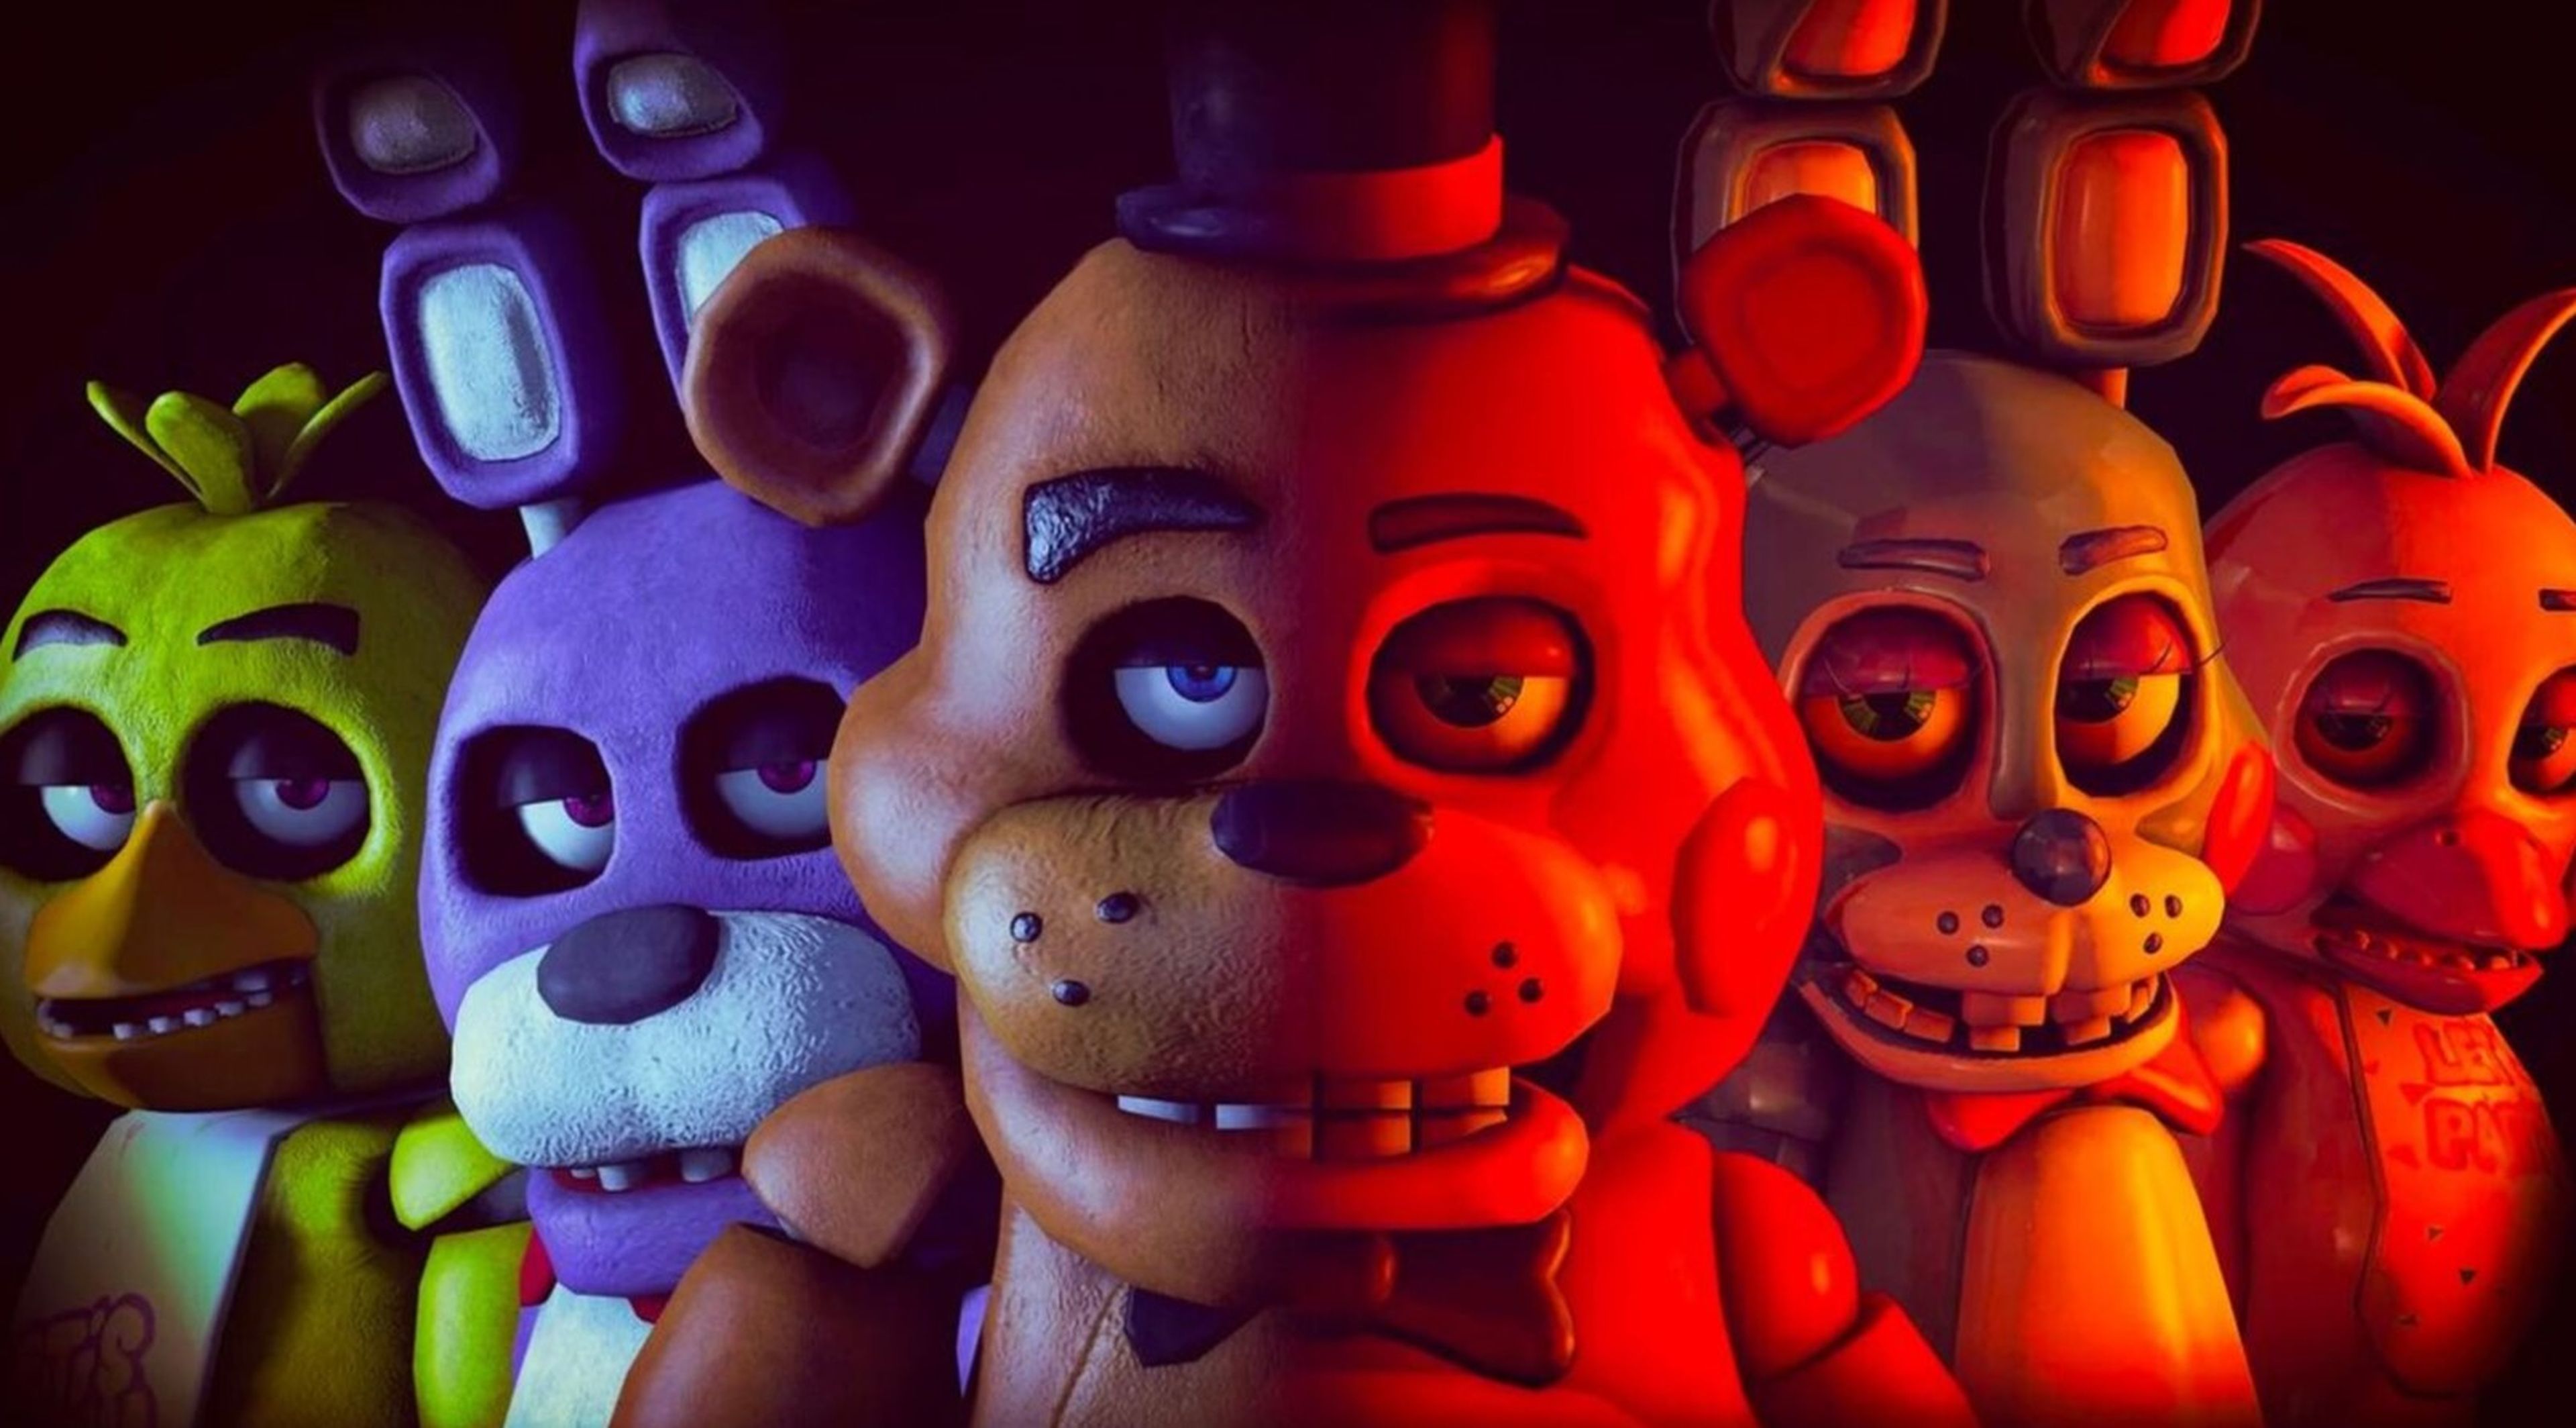 Five Nights at Freddy's franquicia